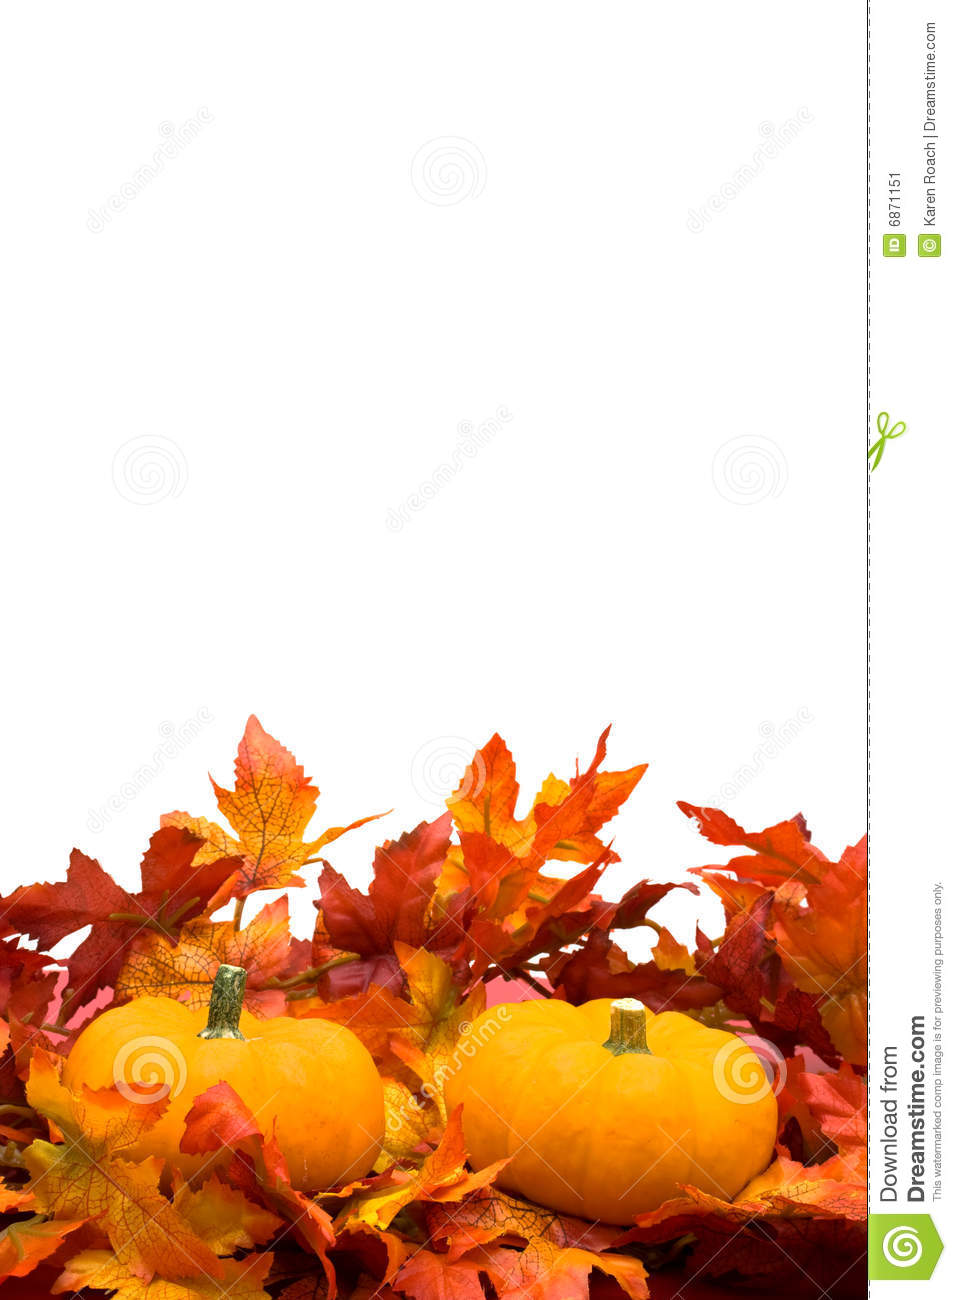 Fall Leaves With Pumpkin On White Background Fall Harvest